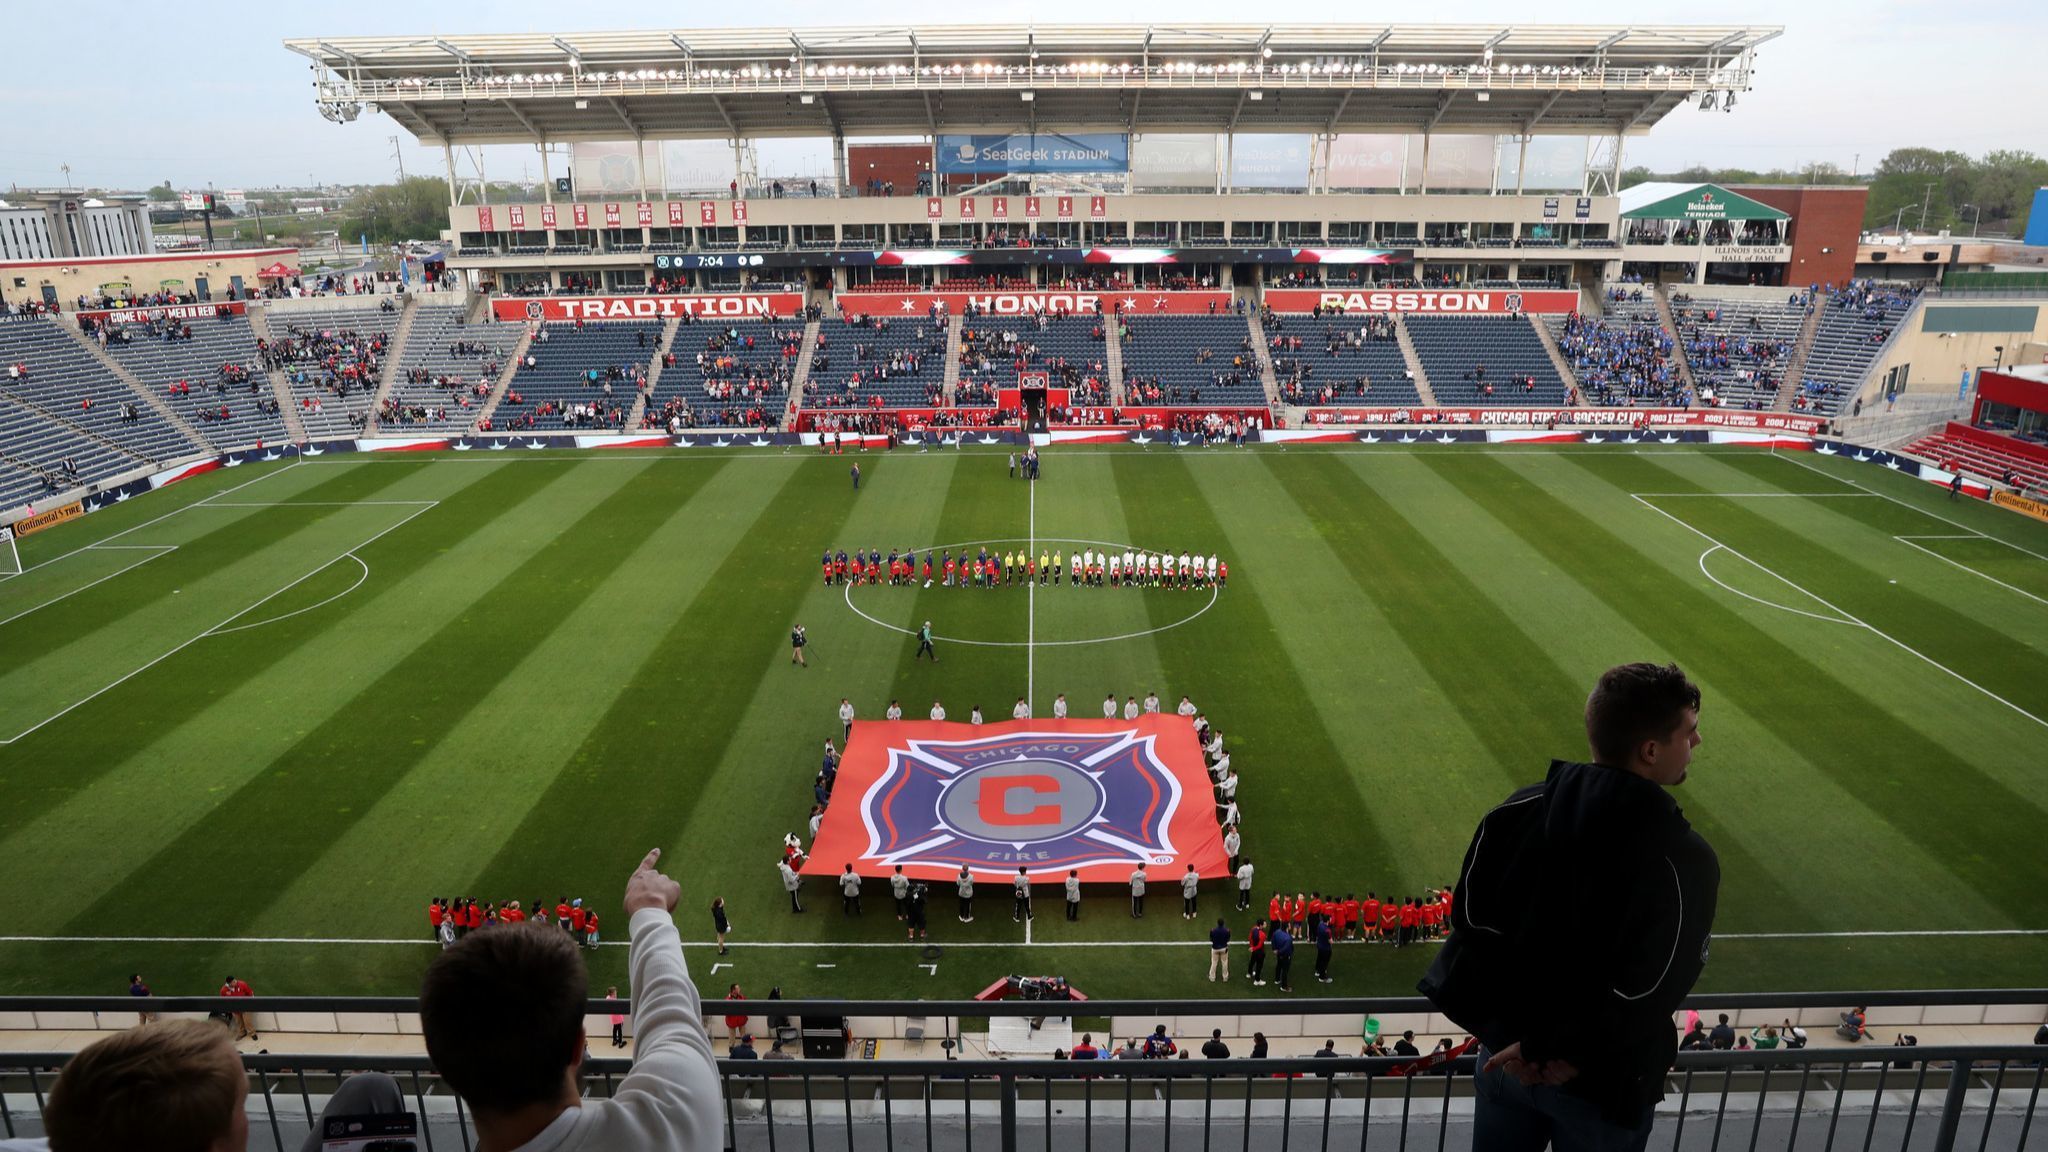 Bridgeview says the Chicago Fire will pay $65 million in a proposed deal to leave SeatGeek Stadium